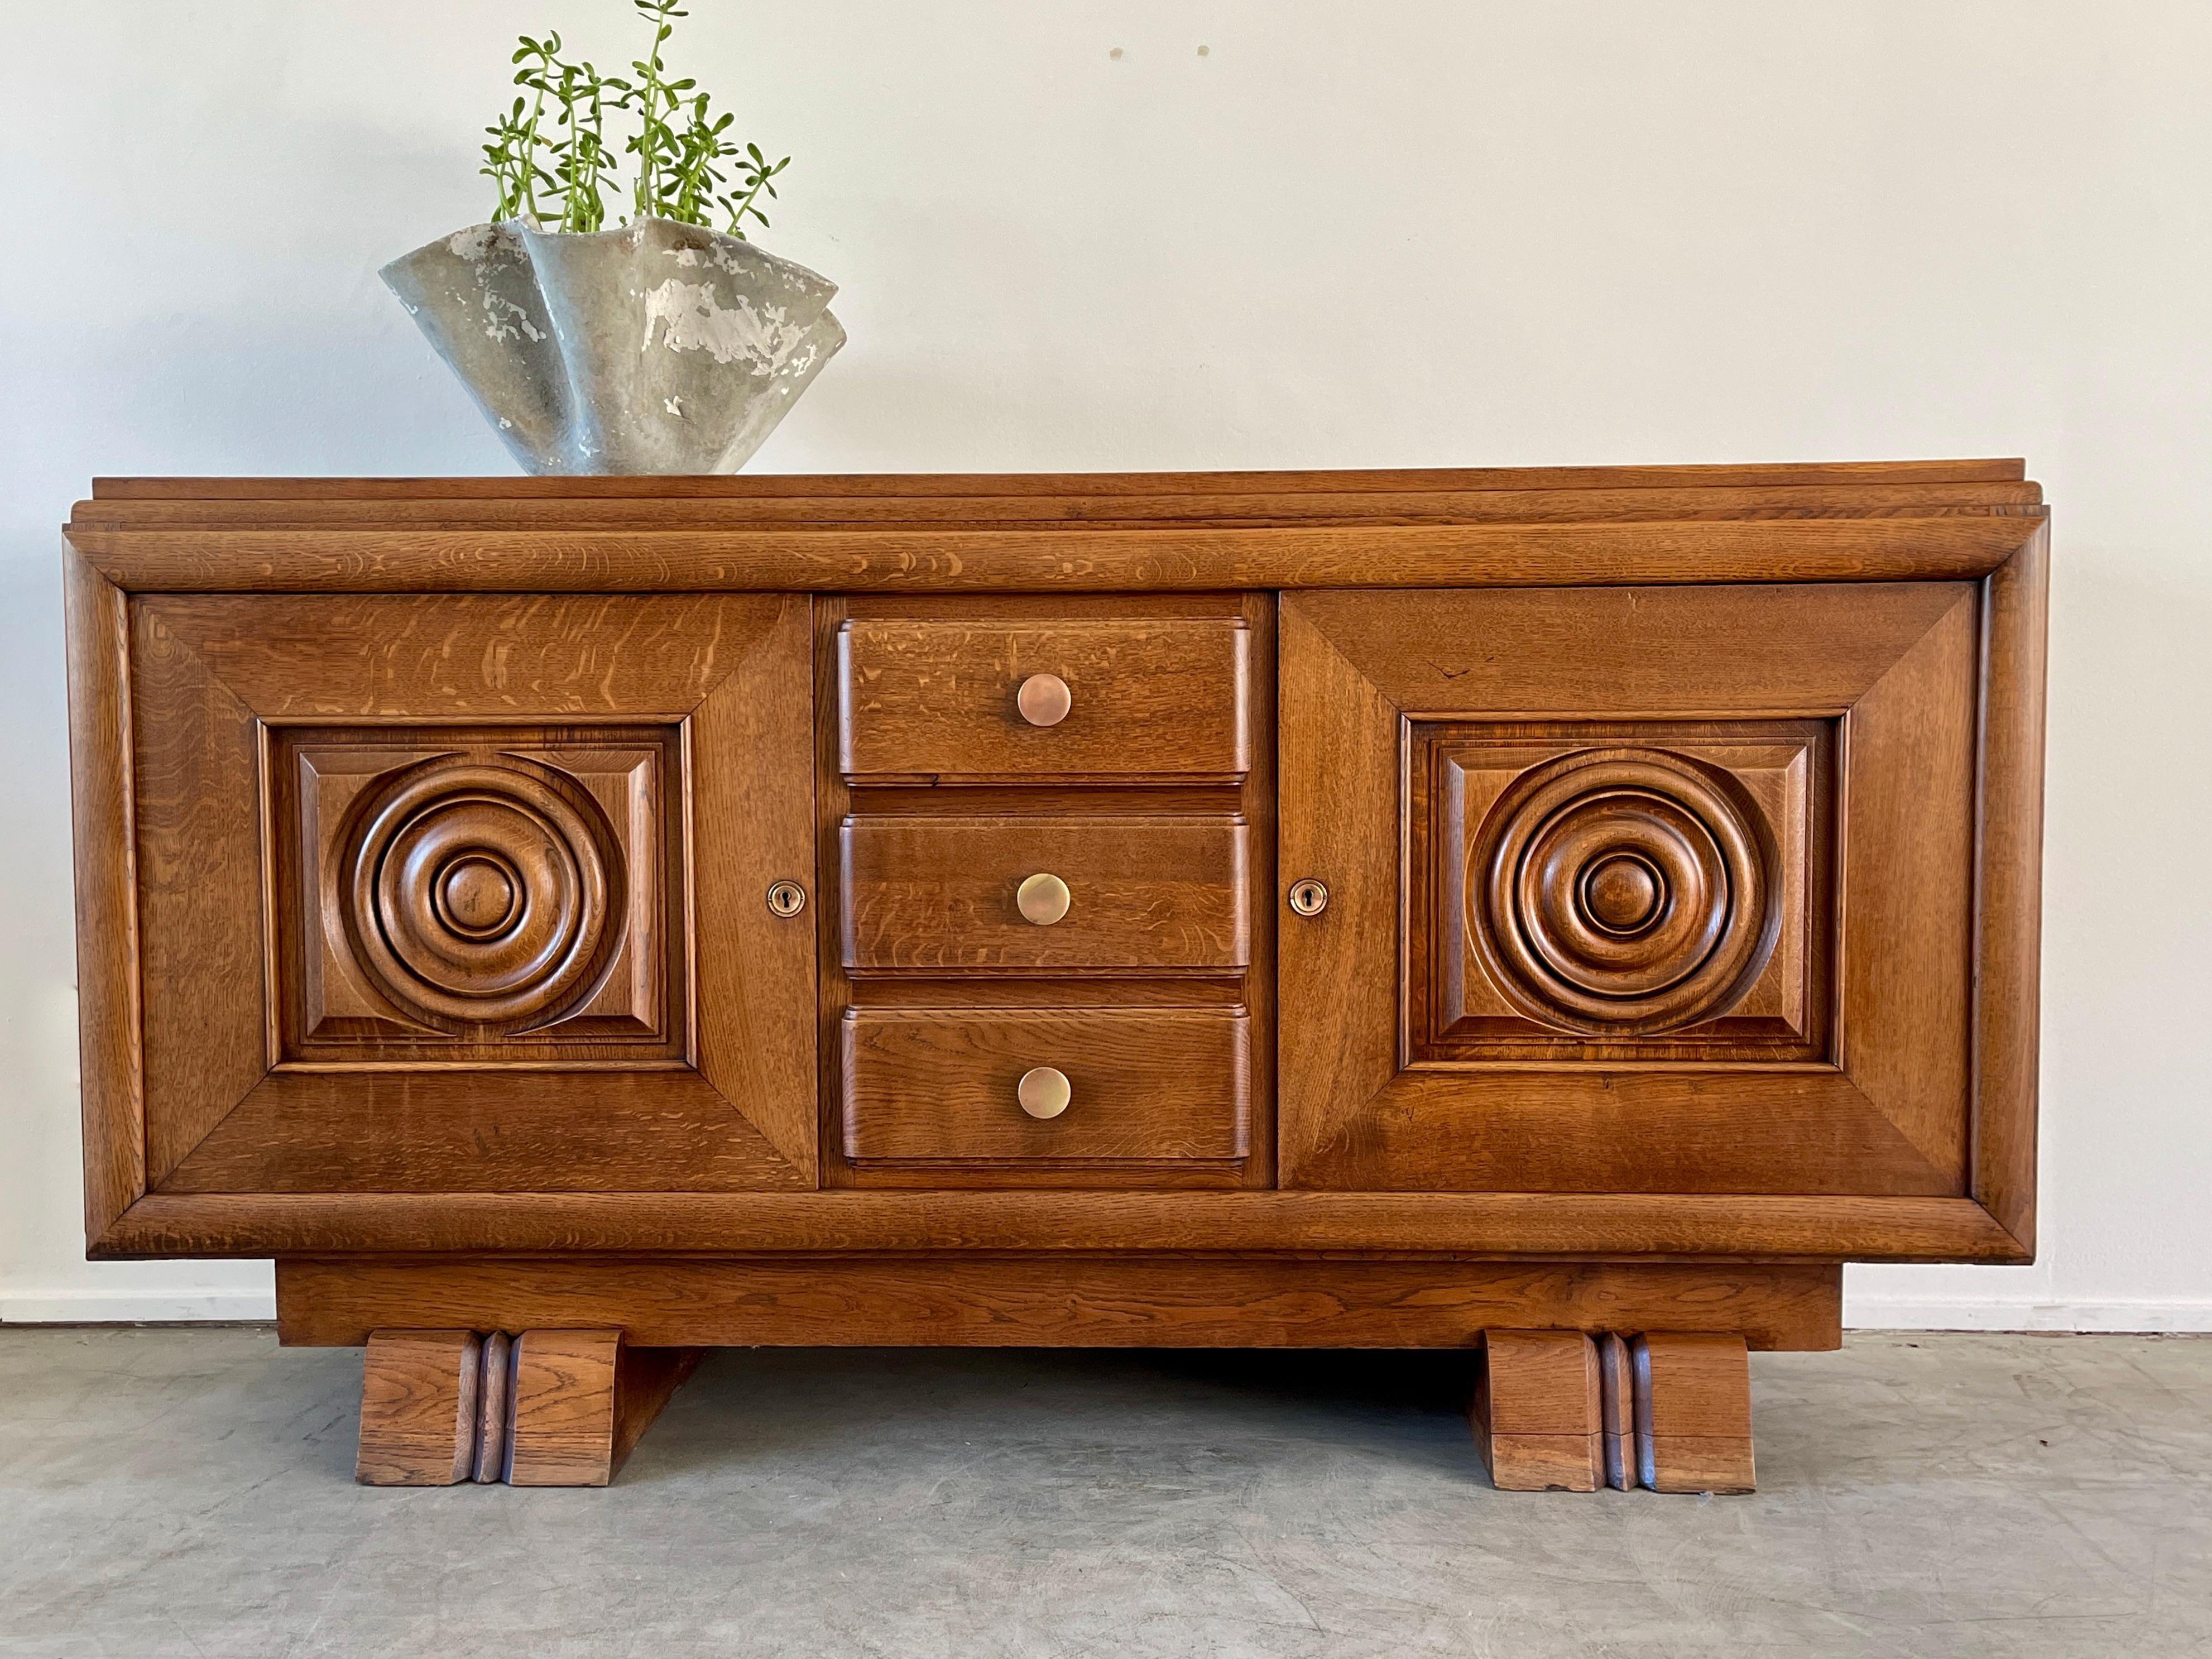 1930's French walnut cabinet with concentric circle carvings on each door and ornate detail throughout. 
Original brass hardware - open shelving on each side with center drawers in center
Gorgeous original patina.